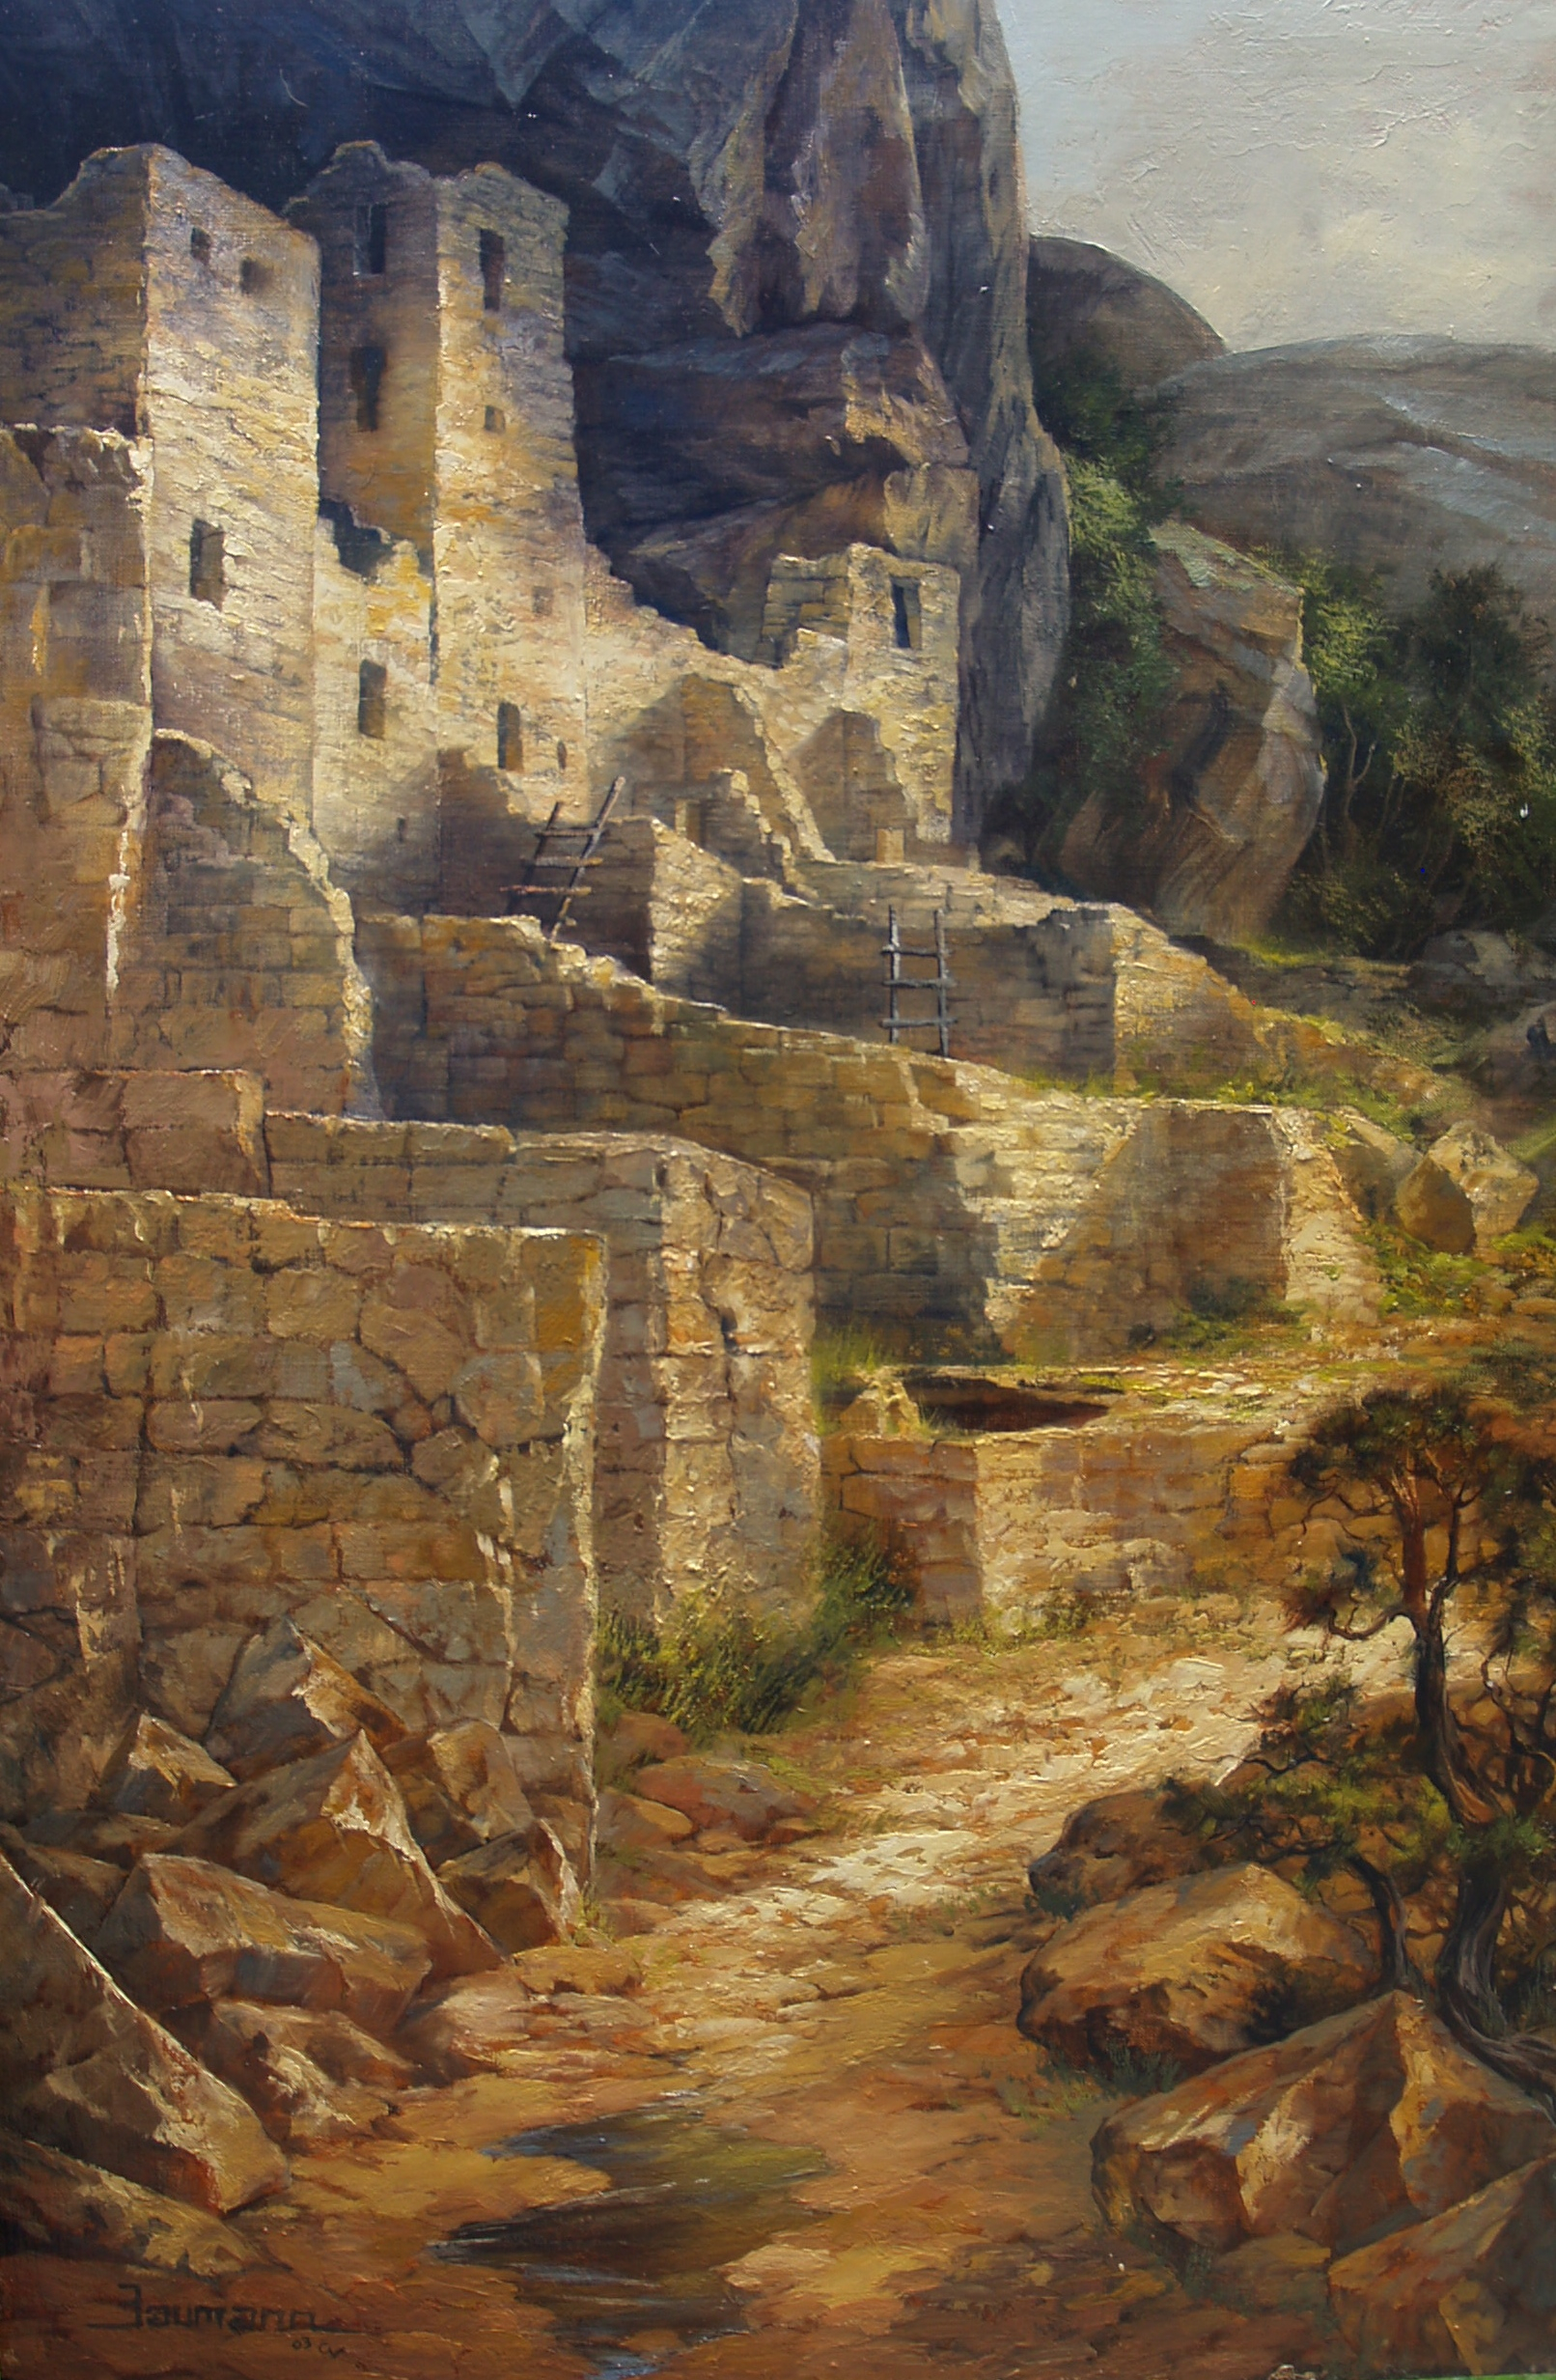 This oil painting by Stefan Baumann shows the dwelling place of the Anasazi Indians in Mesa Verde National Park.